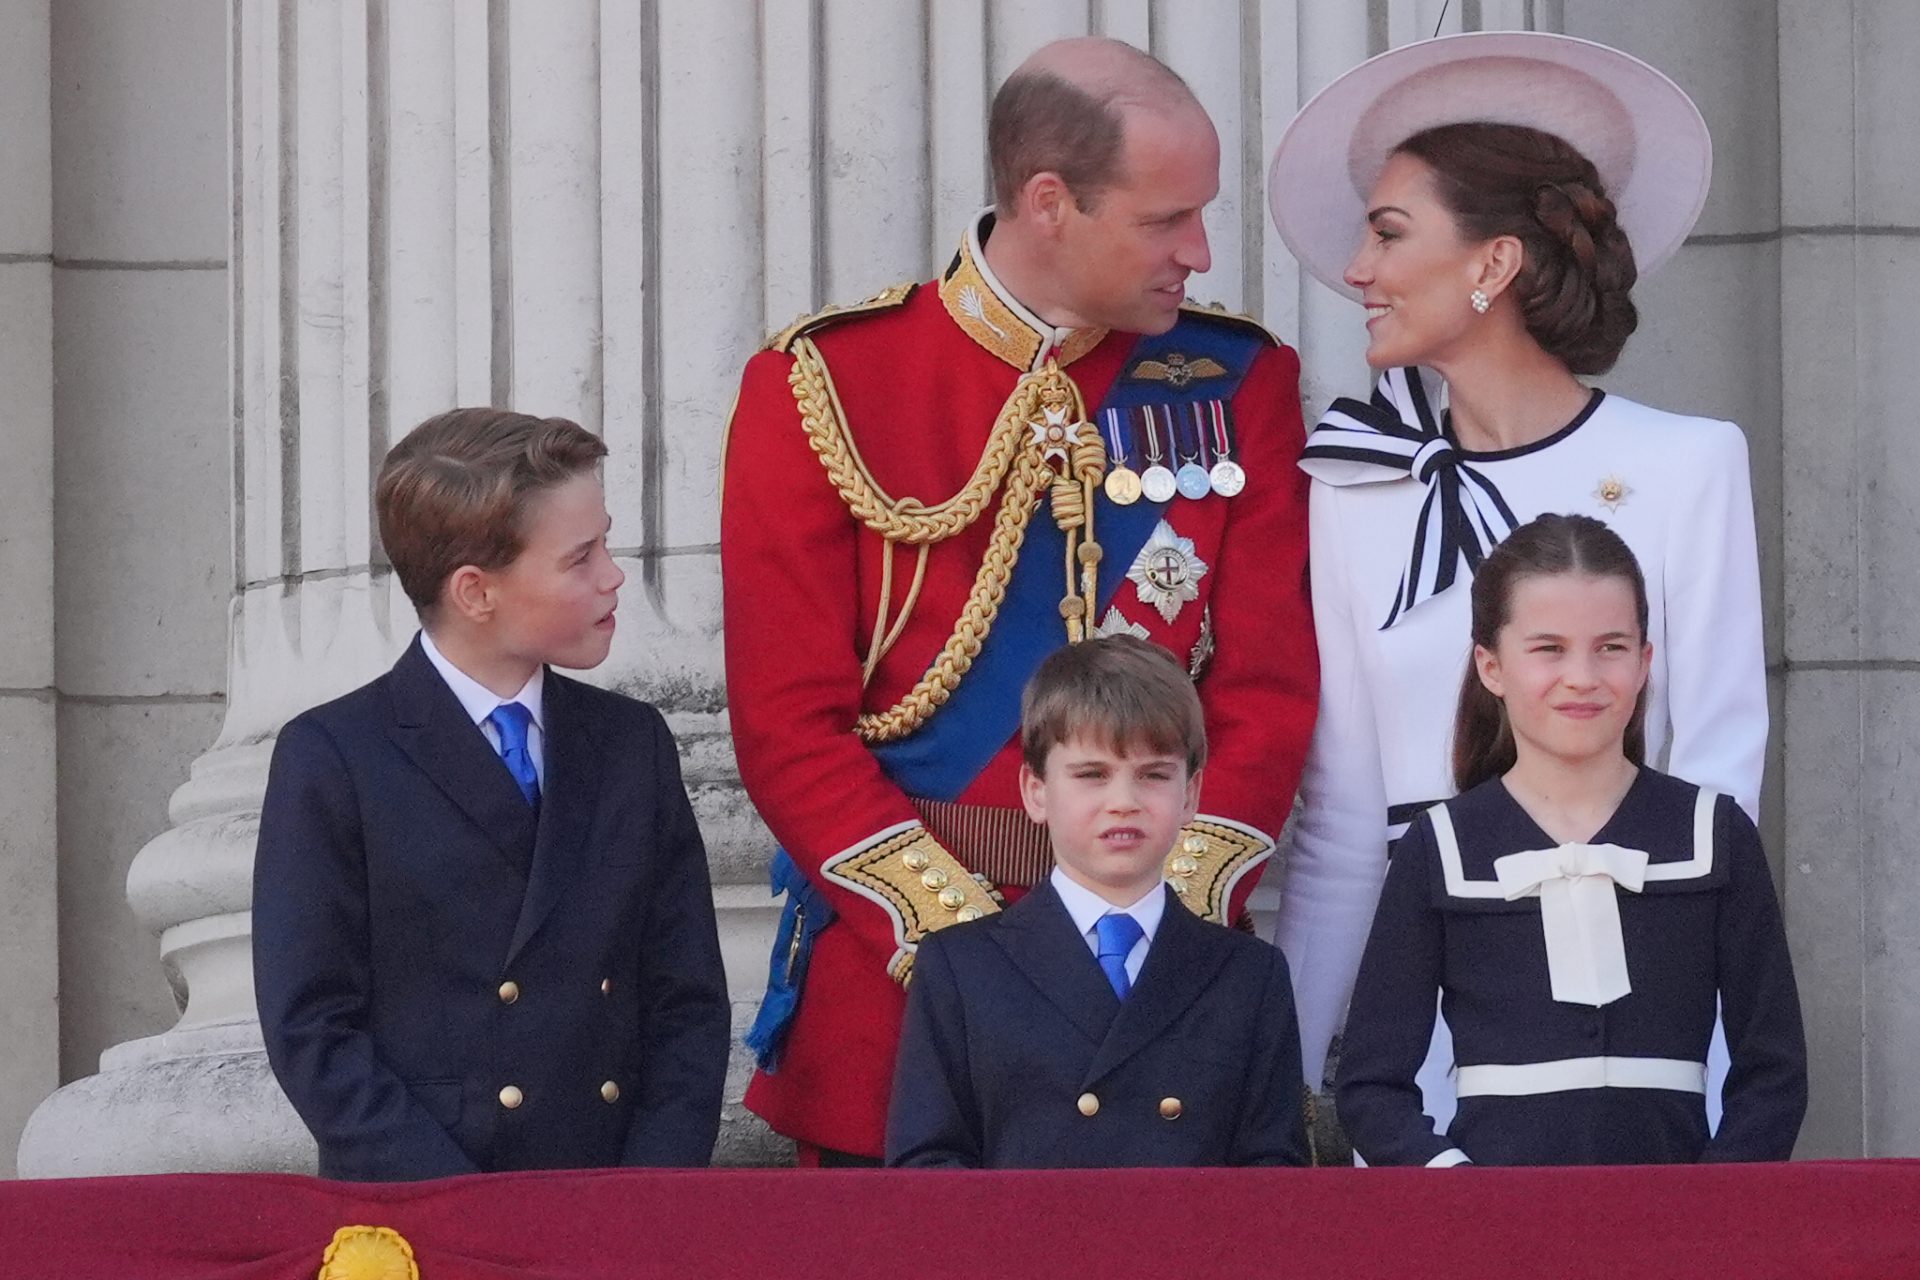 Prince William and Catherine share a moment